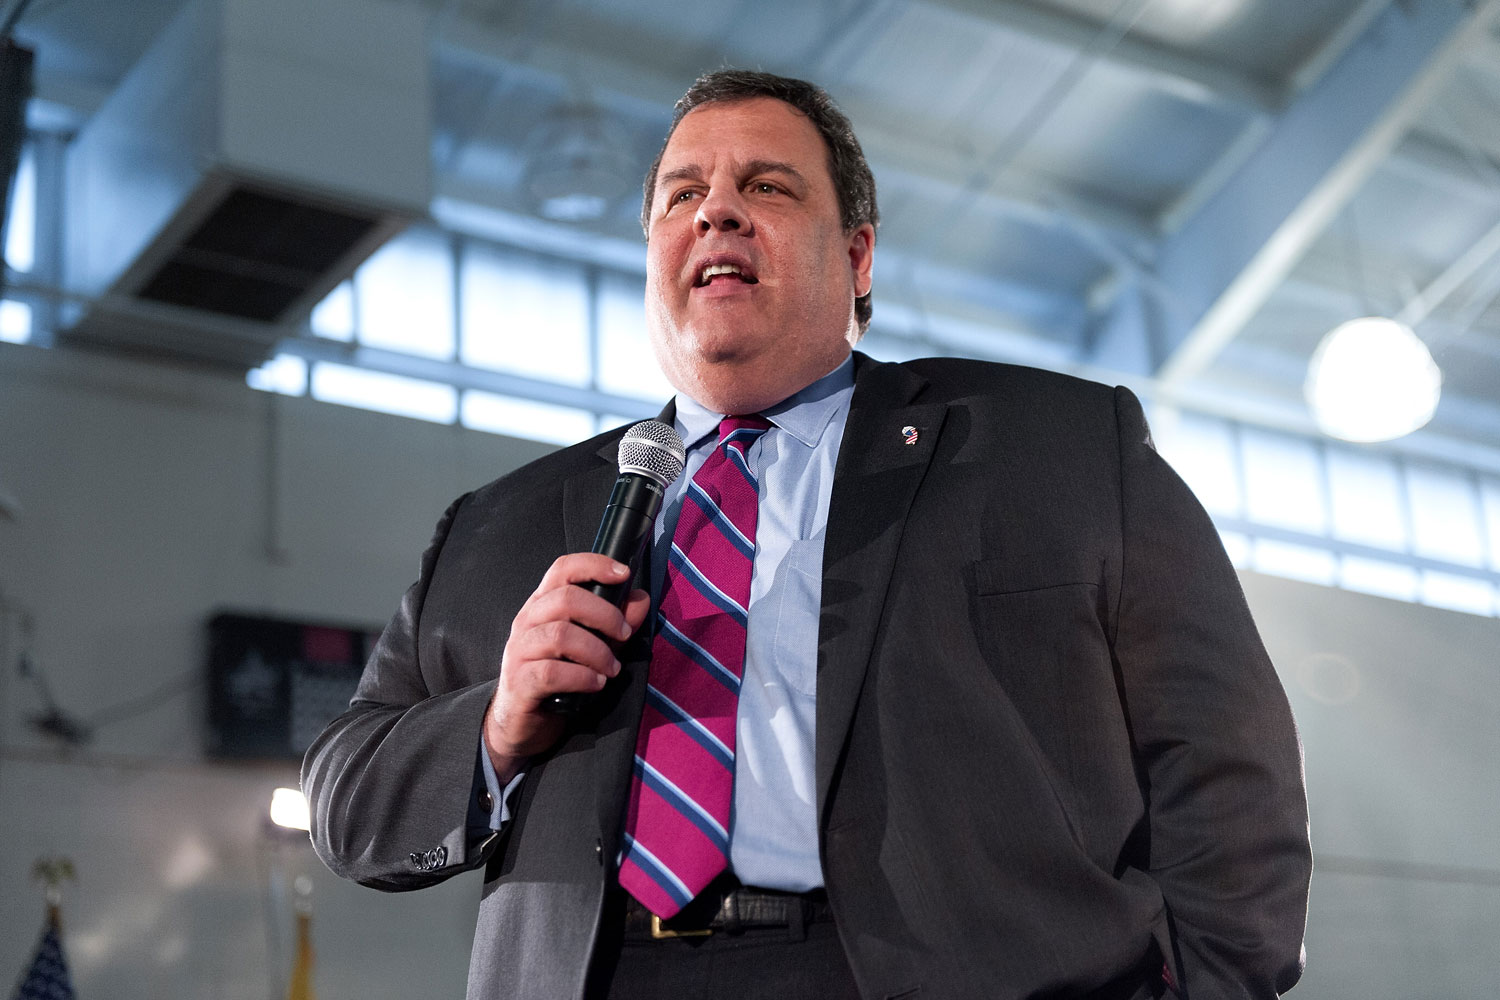 New Jersey Governor Chris Christie speaks during his 100th town-hall meeting, held at St. Mary's Parish Center in Manahawkin, N.J., on Jan. 16, 2013 (D Dipasupil / Getty Images for Extra)